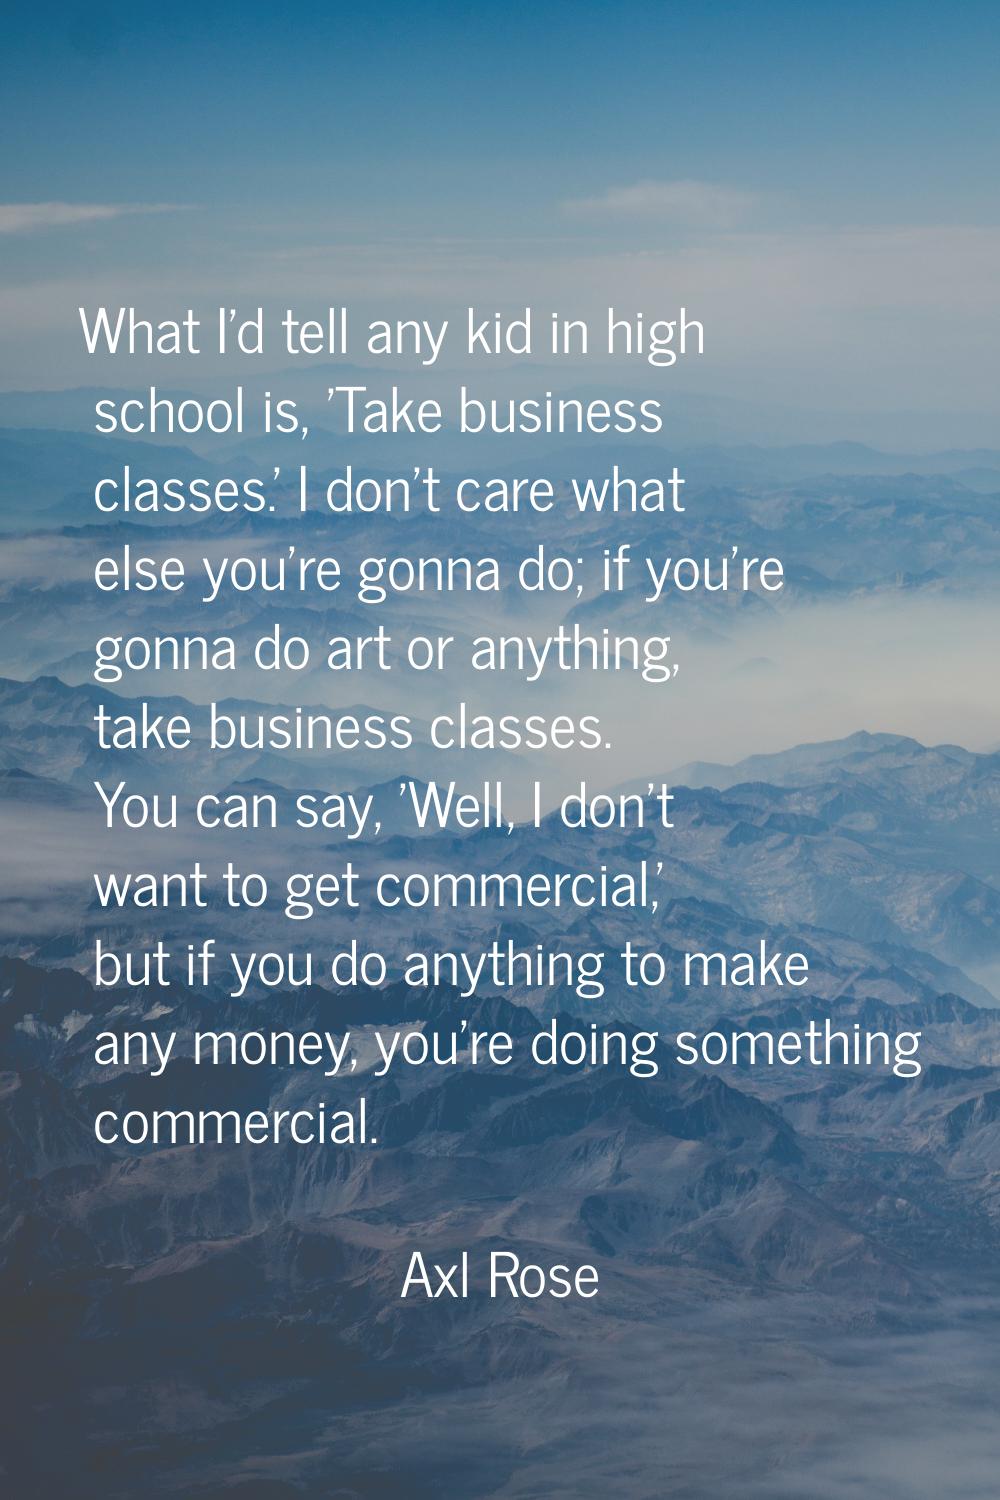 What I'd tell any kid in high school is, 'Take business classes.' I don't care what else you're gon